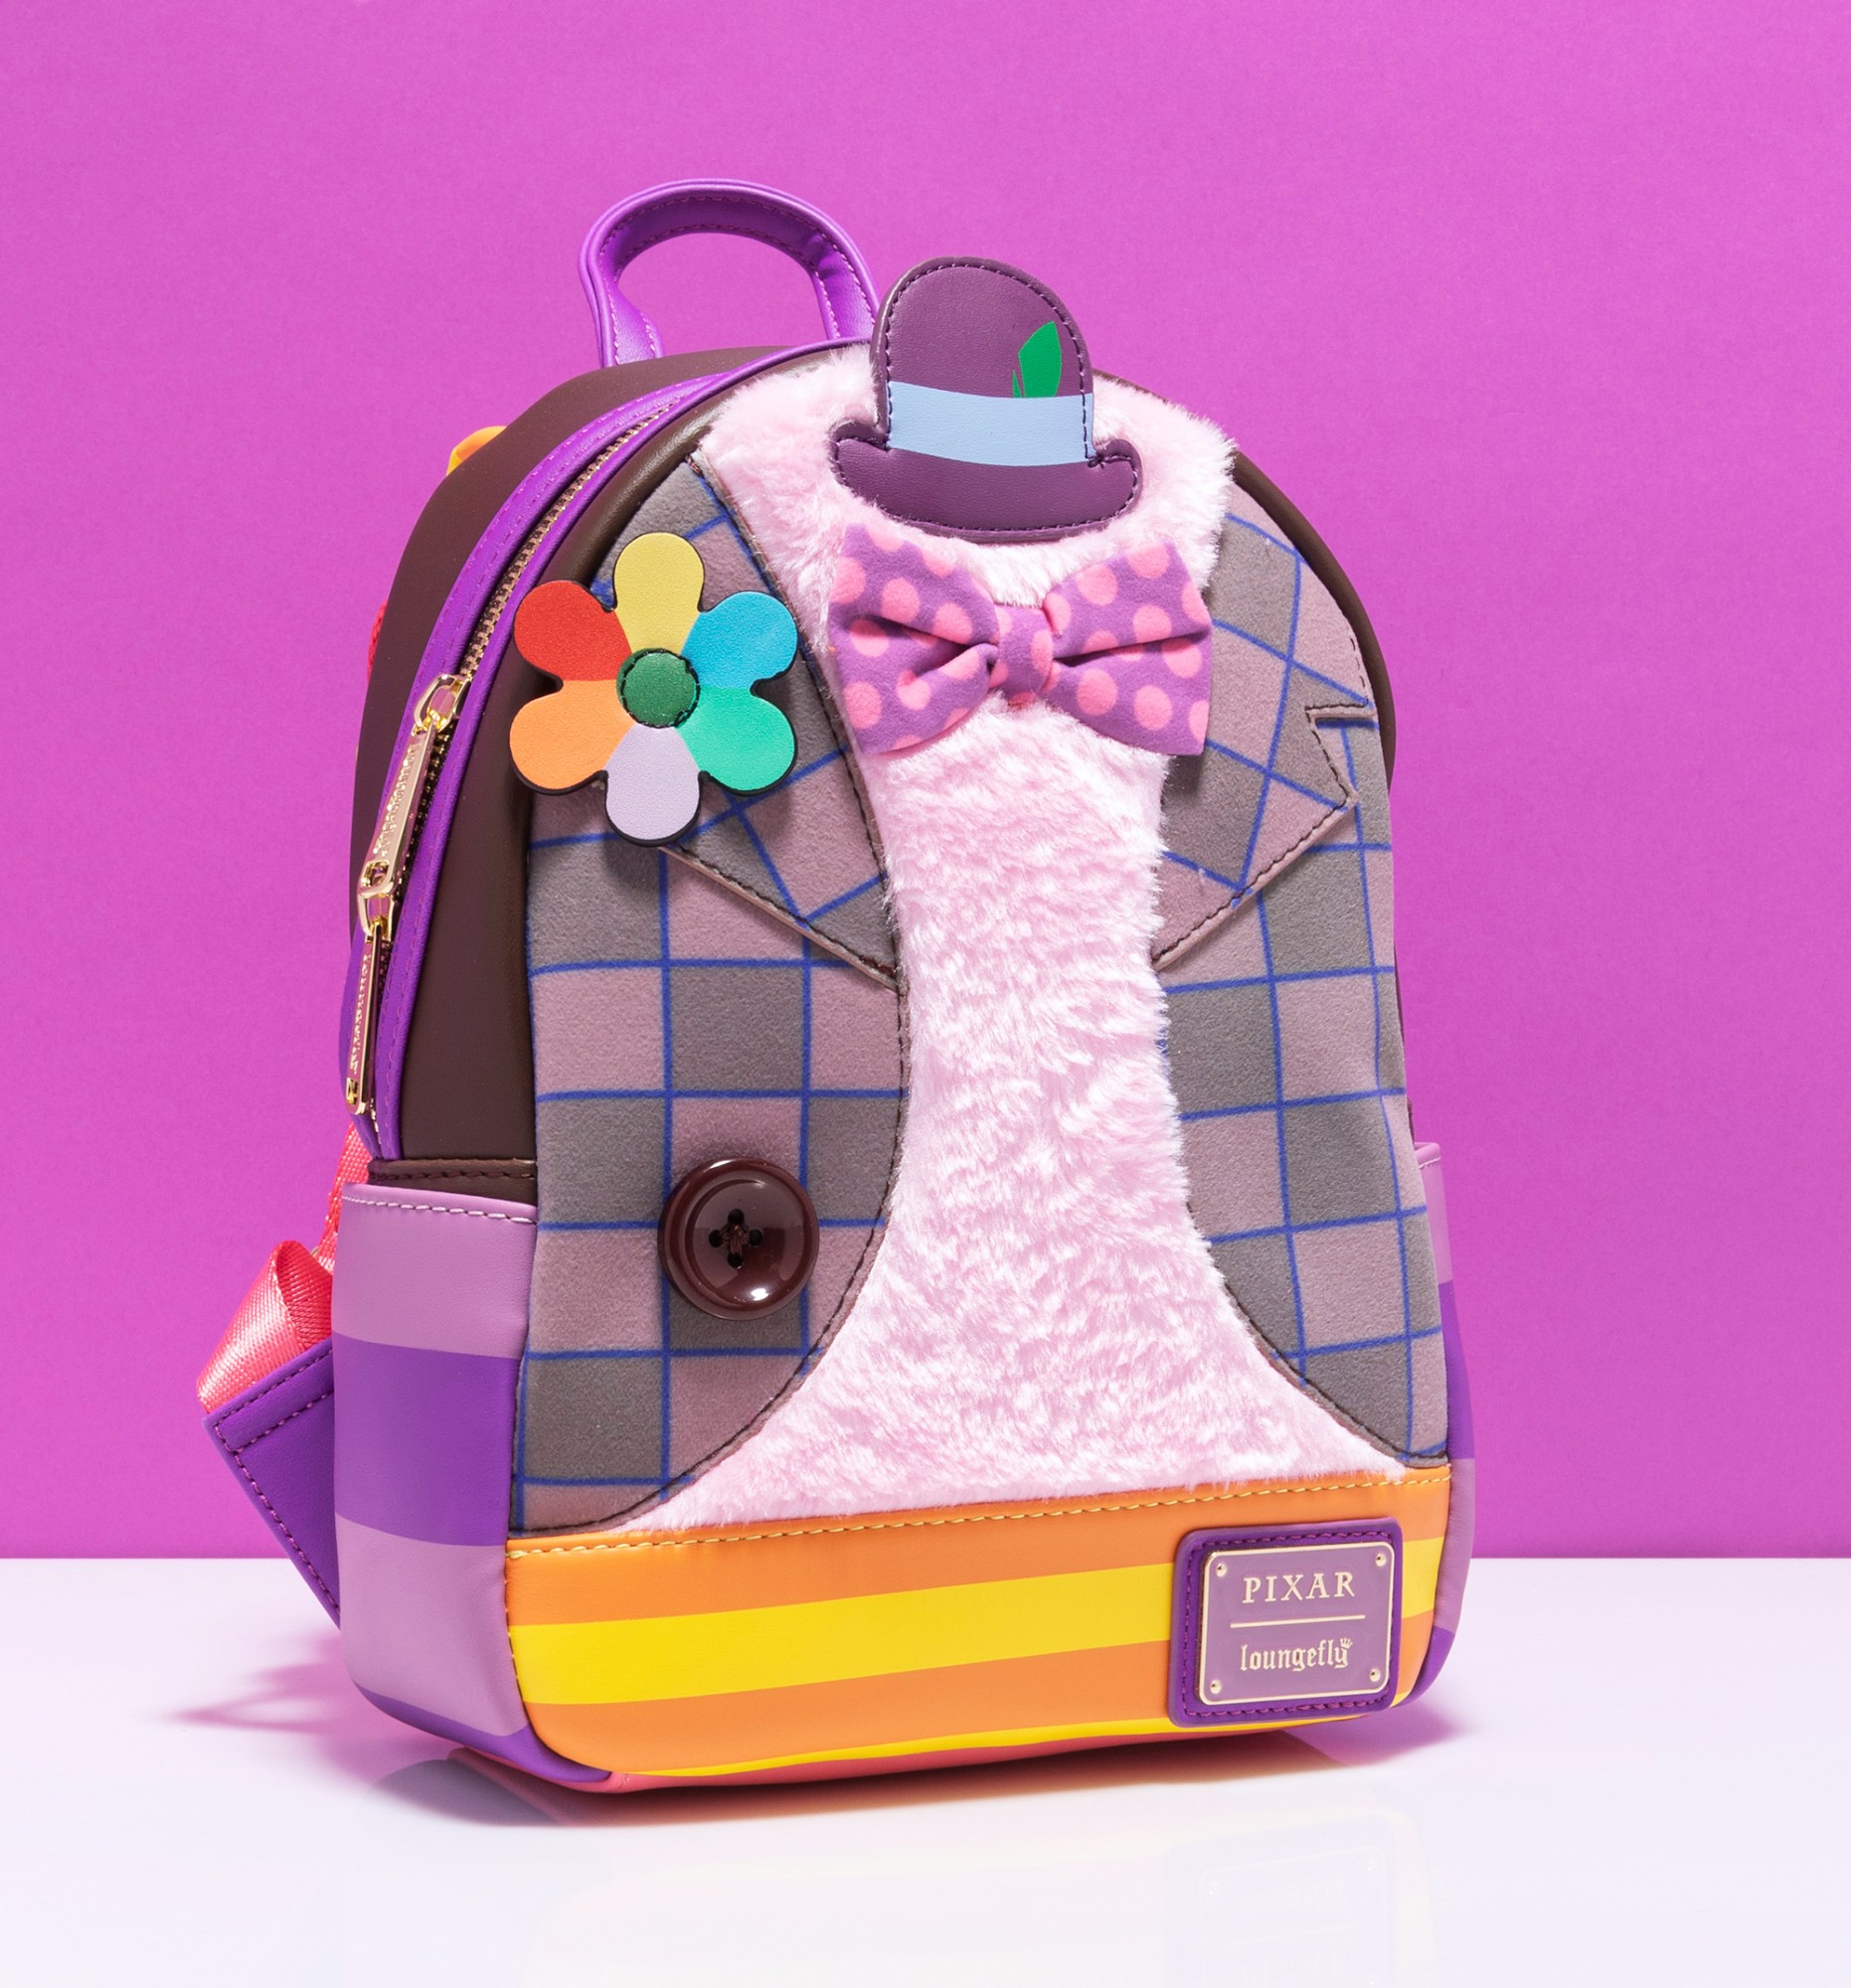 Loungefly Disney Pixar Inside Out Bing Bong Cosplay Mini Backpack